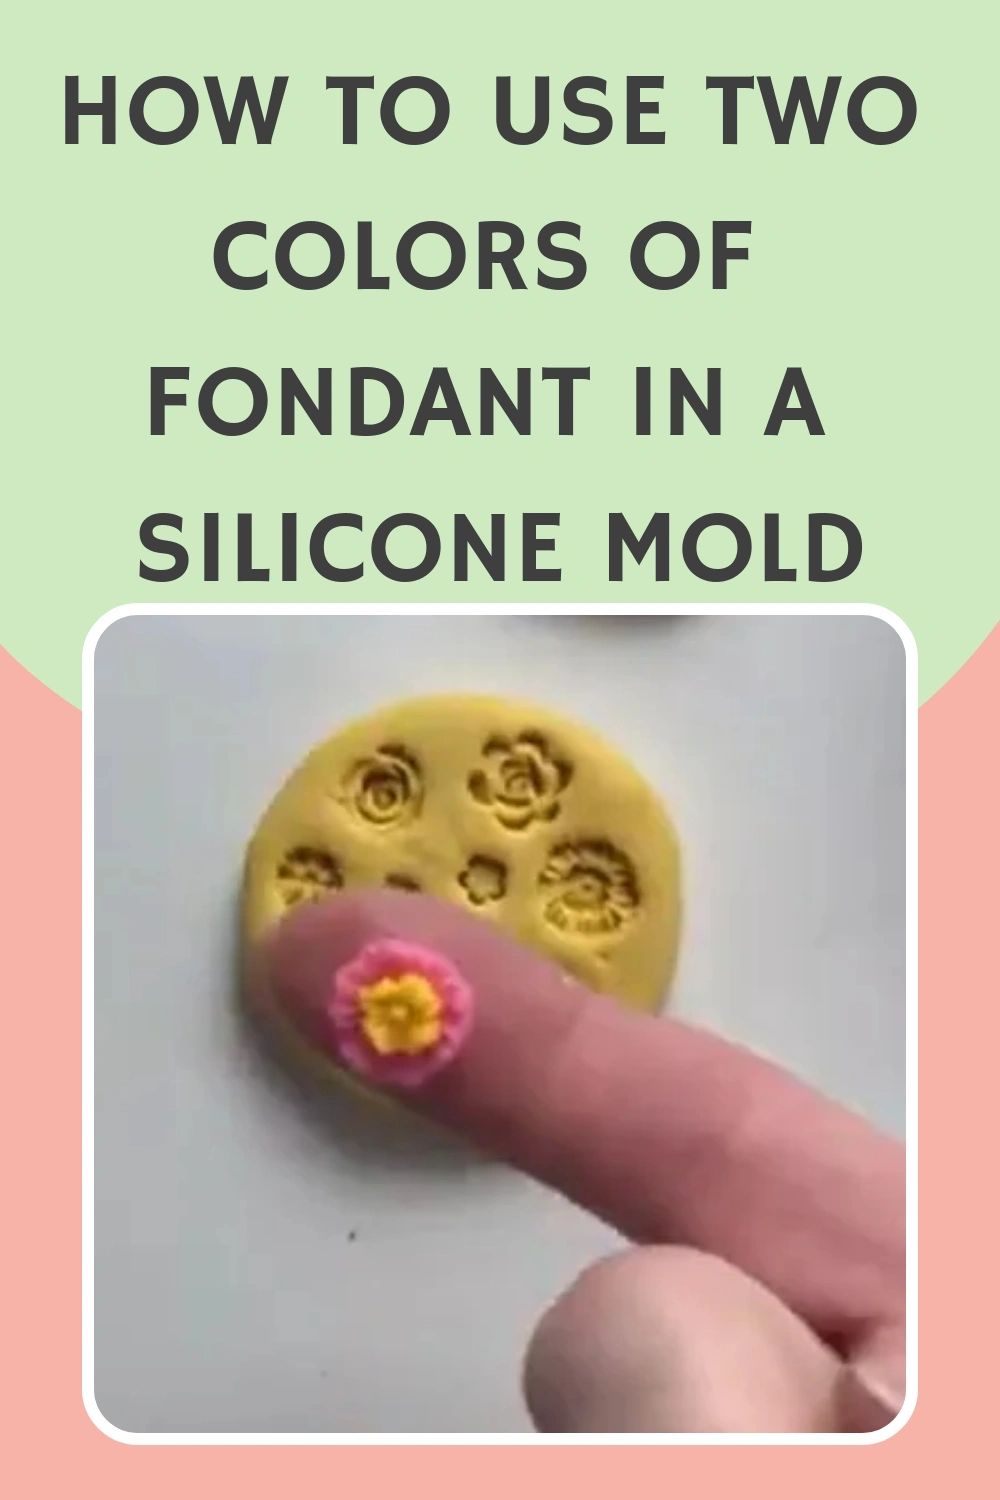 Tips&Tricks: How to use silicone molds for polymer clay projects